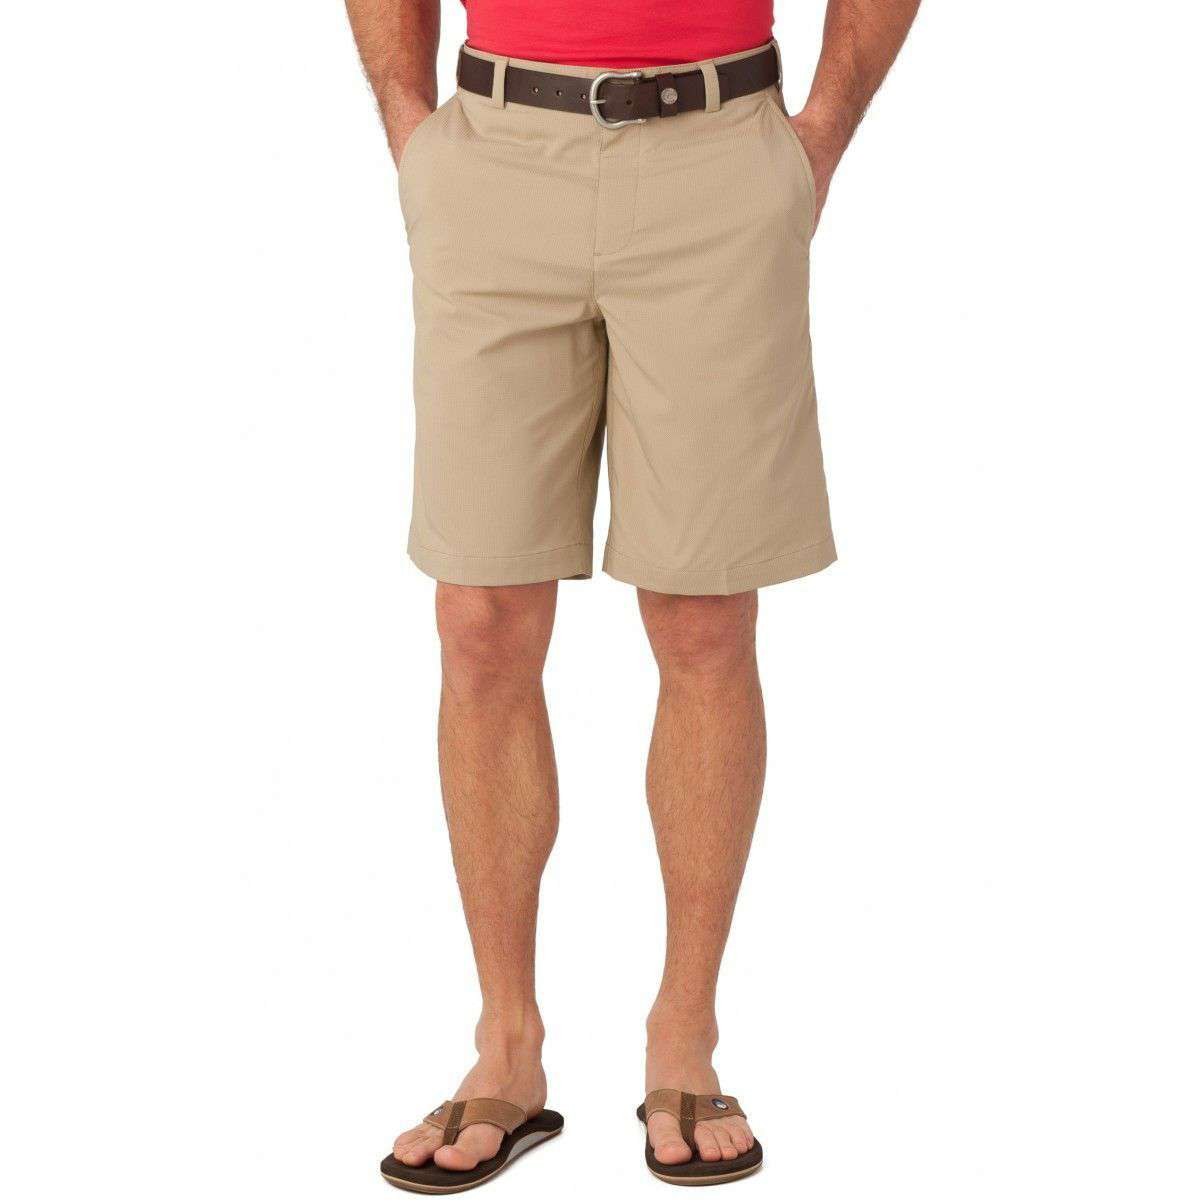 Technical Shorts in Sandstone Khaki by Southern Tide - Country Club Prep